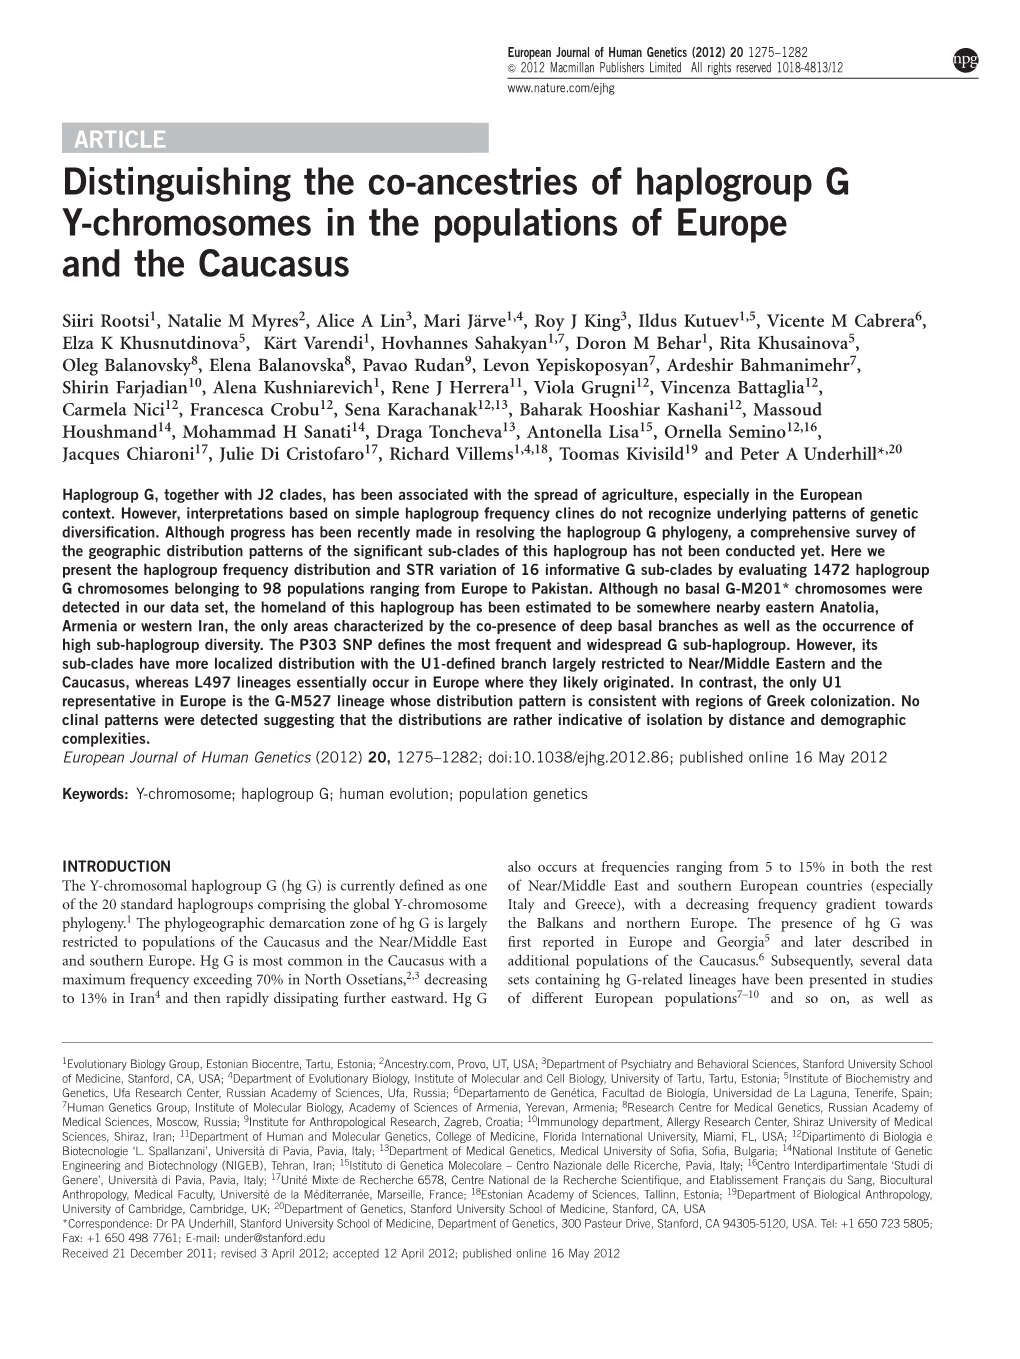 Distinguishing the Co-Ancestries of Haplogroup G Y-Chromosomes in the Populations of Europe and the Caucasus